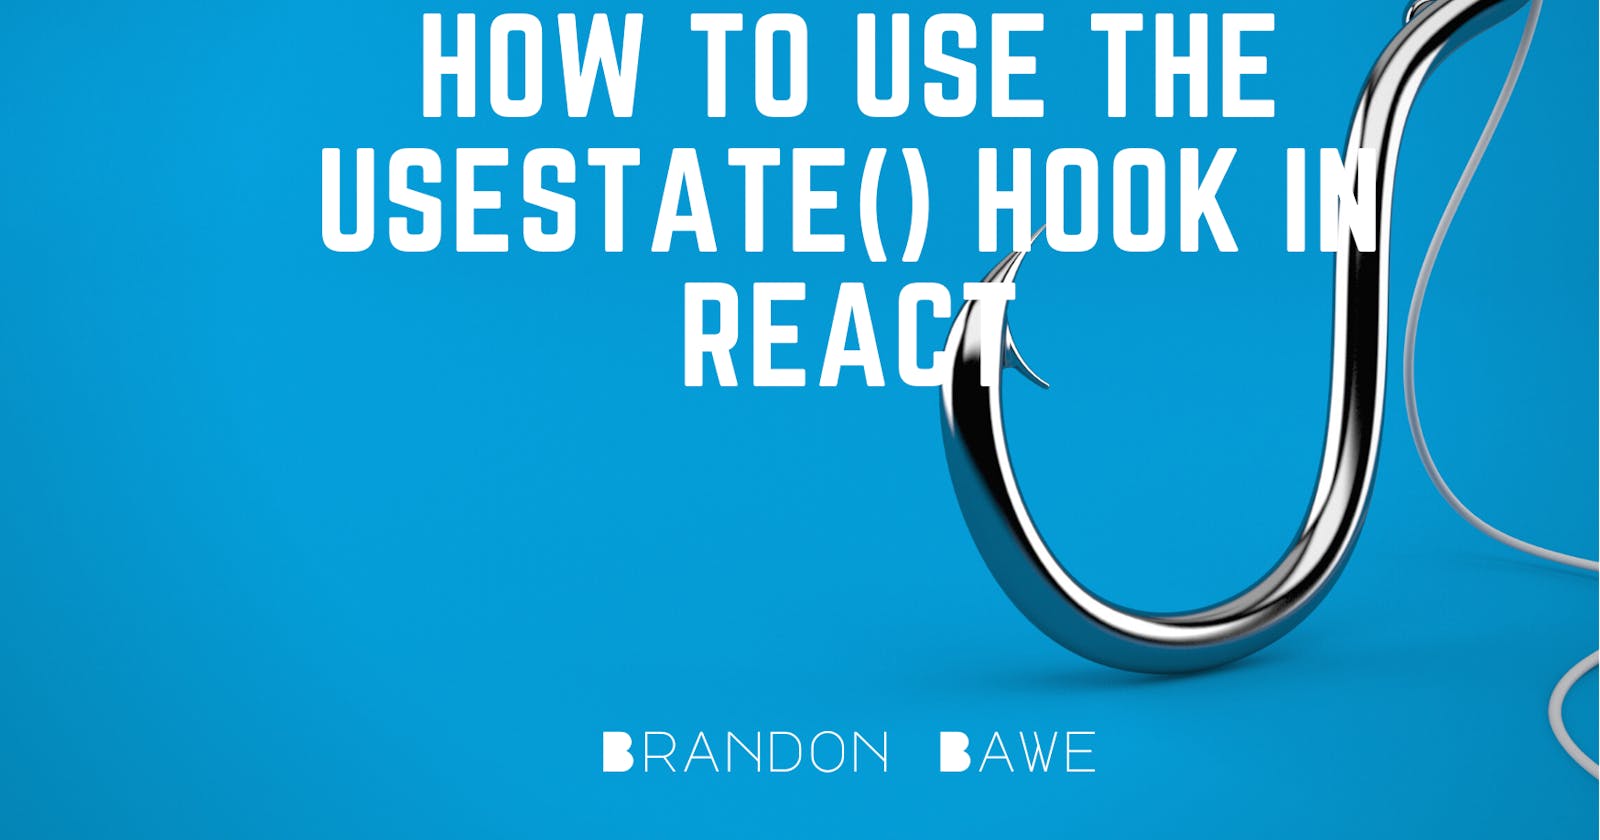 How to use the useState() Hook in React